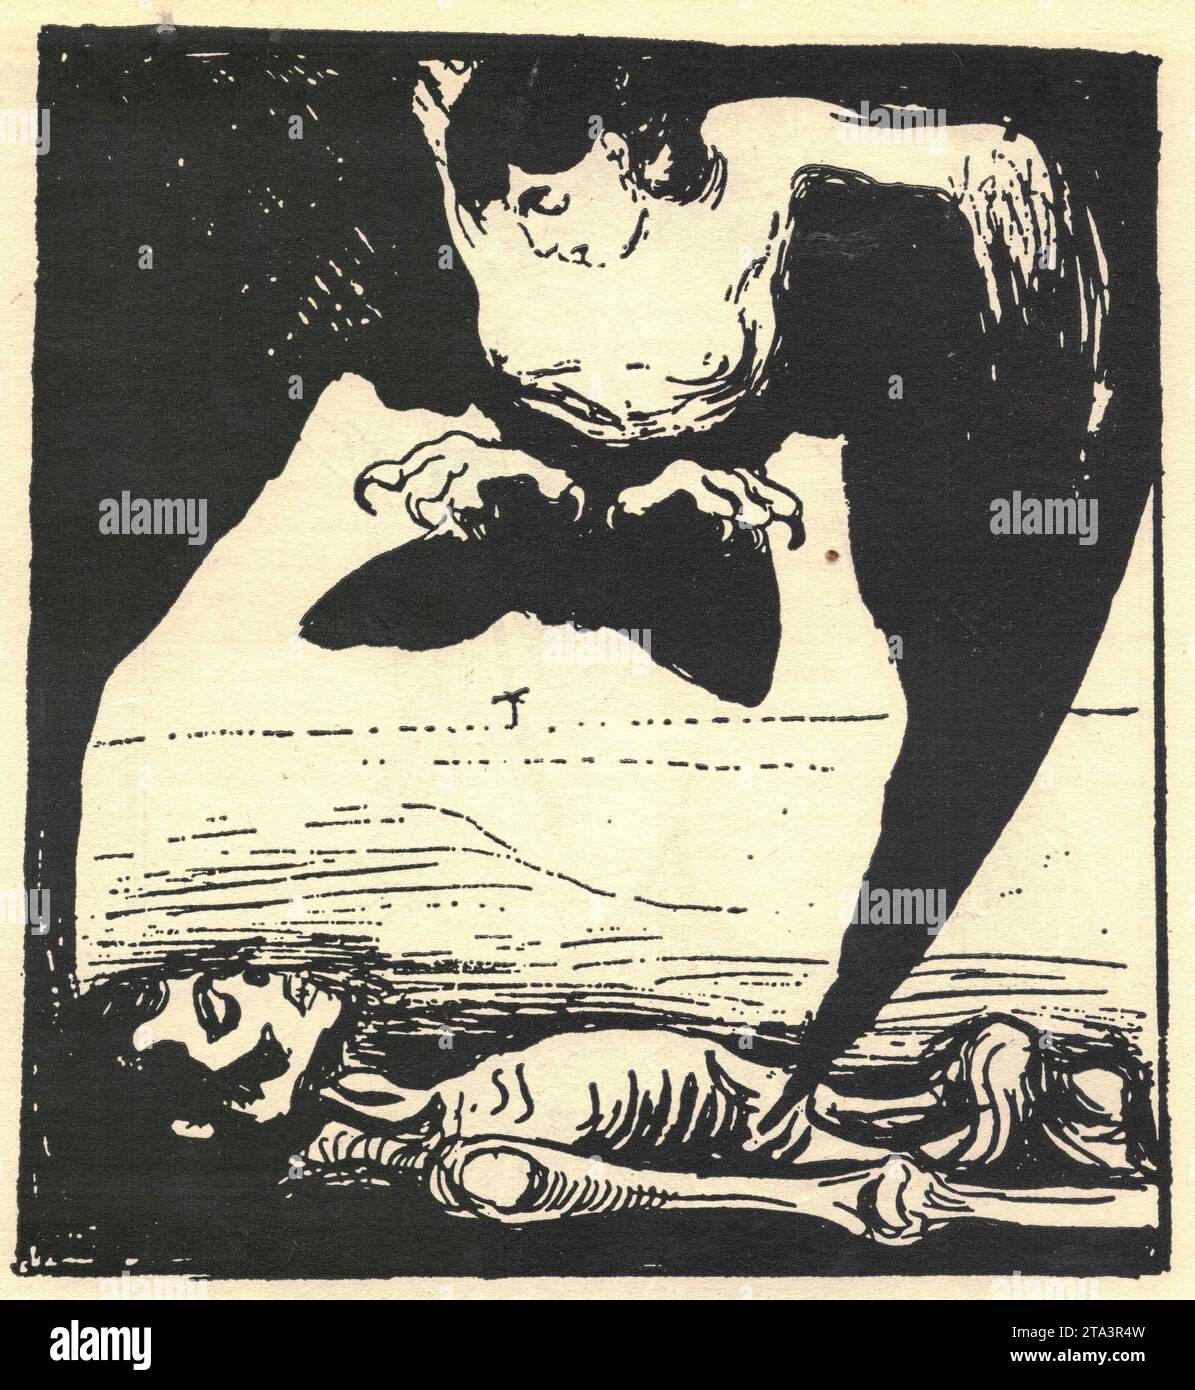 Lithography by Edvard Munch. Lithography Vampire, 1900. Edvard Munch , (12 December 1863 – 23 January 1944) was a Norwegian painter. His 1893 work, The Scream, has become one of Western art's most acclaimed images. Edvard Munch is a Norwegian born expressionist painter. His best-known work, The Scream, has become one of the most iconic images of world art. In the late 20th century, he played a great role in German expressionism and the art form that later followed; namely because of the strong mental anguish that was displayed in many of the pieces that he created. Stock Photo